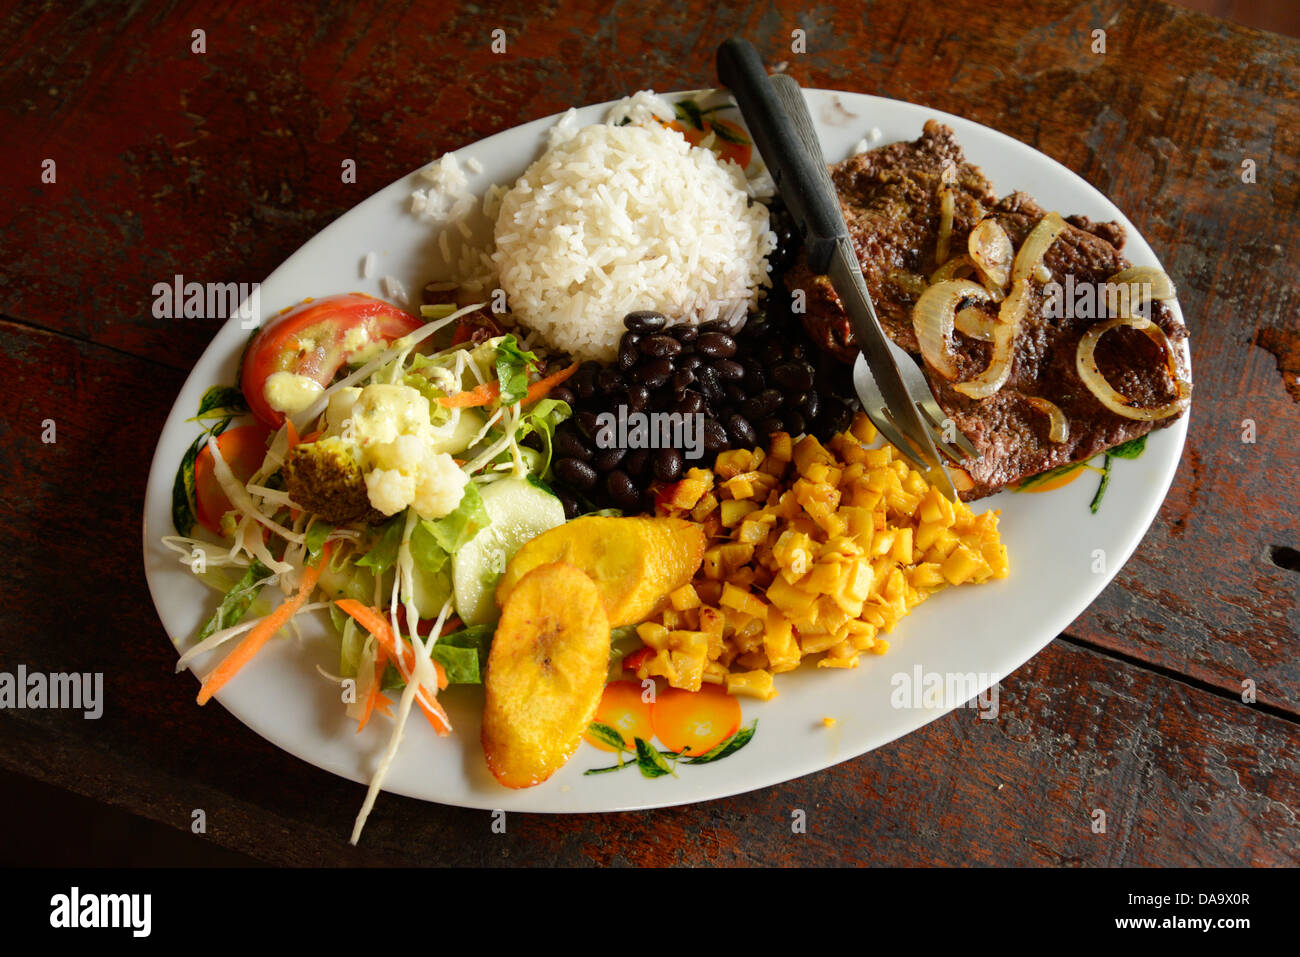 Central America, Costa Rica, Puntarenas, food, plate, typical, rice, beans, Puntarenas, Stock Photo